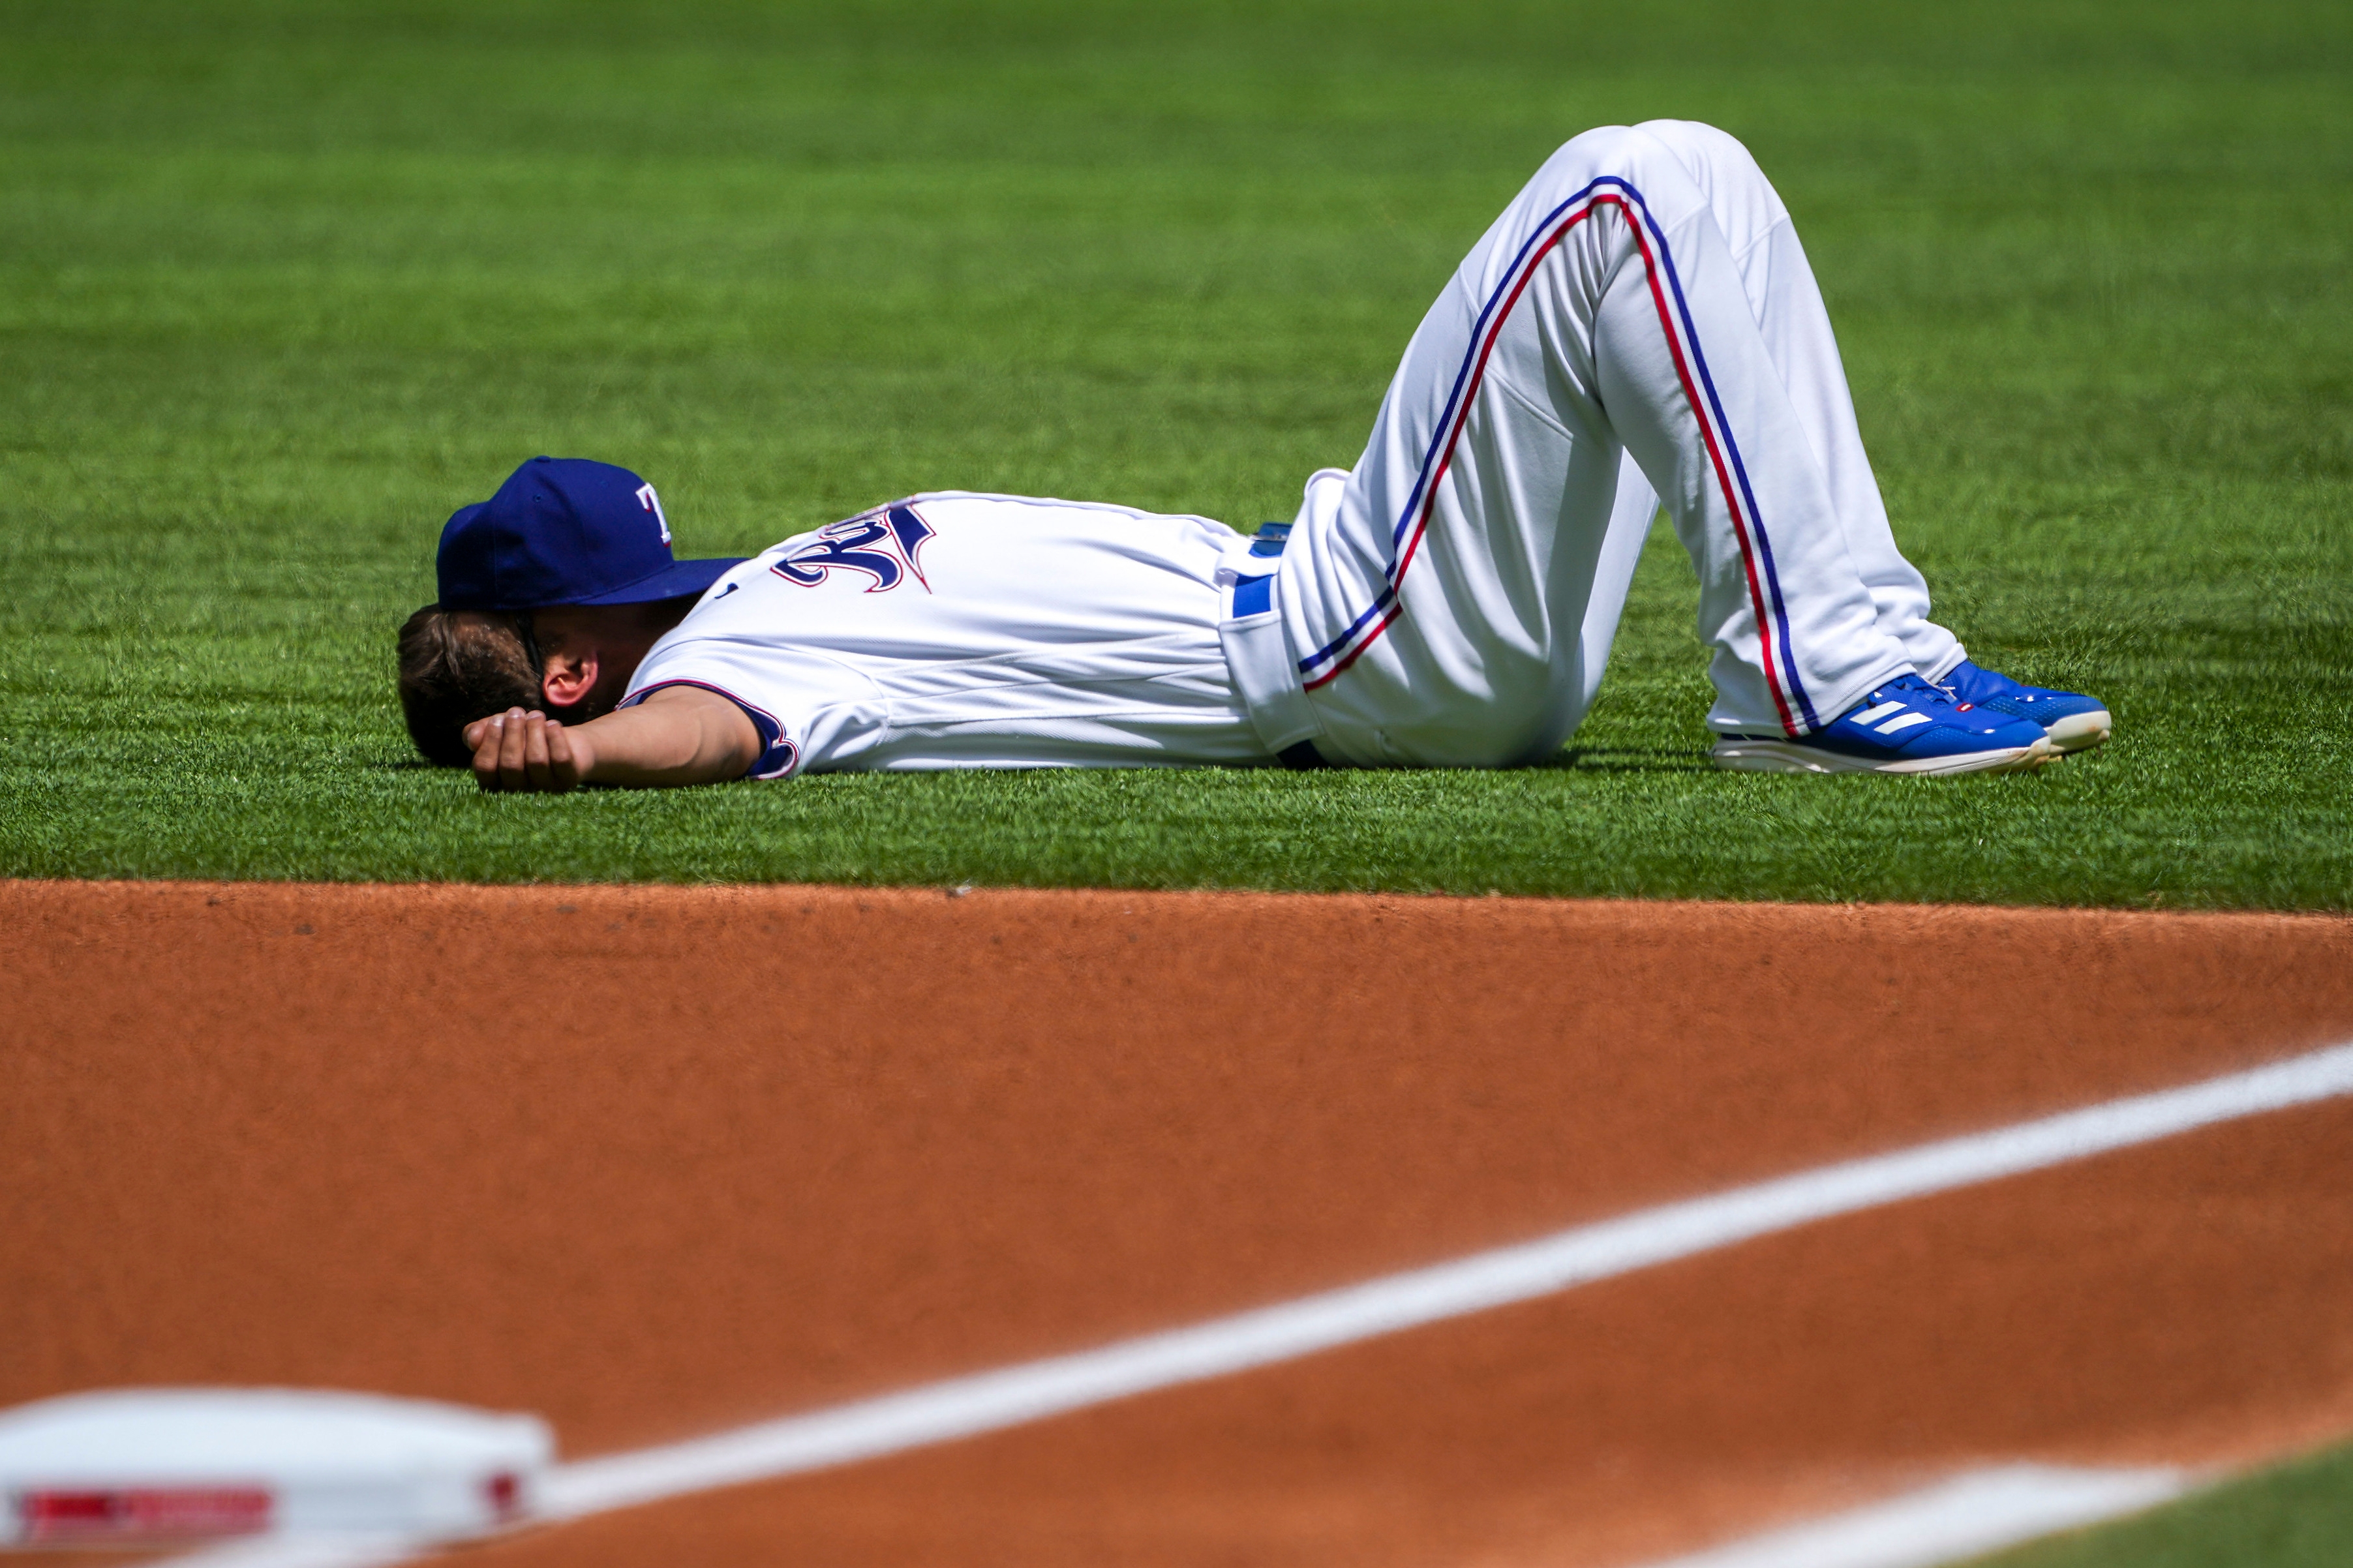 Rangers shortstop Corey Seager given Sunday's game vs. Angels off for rest